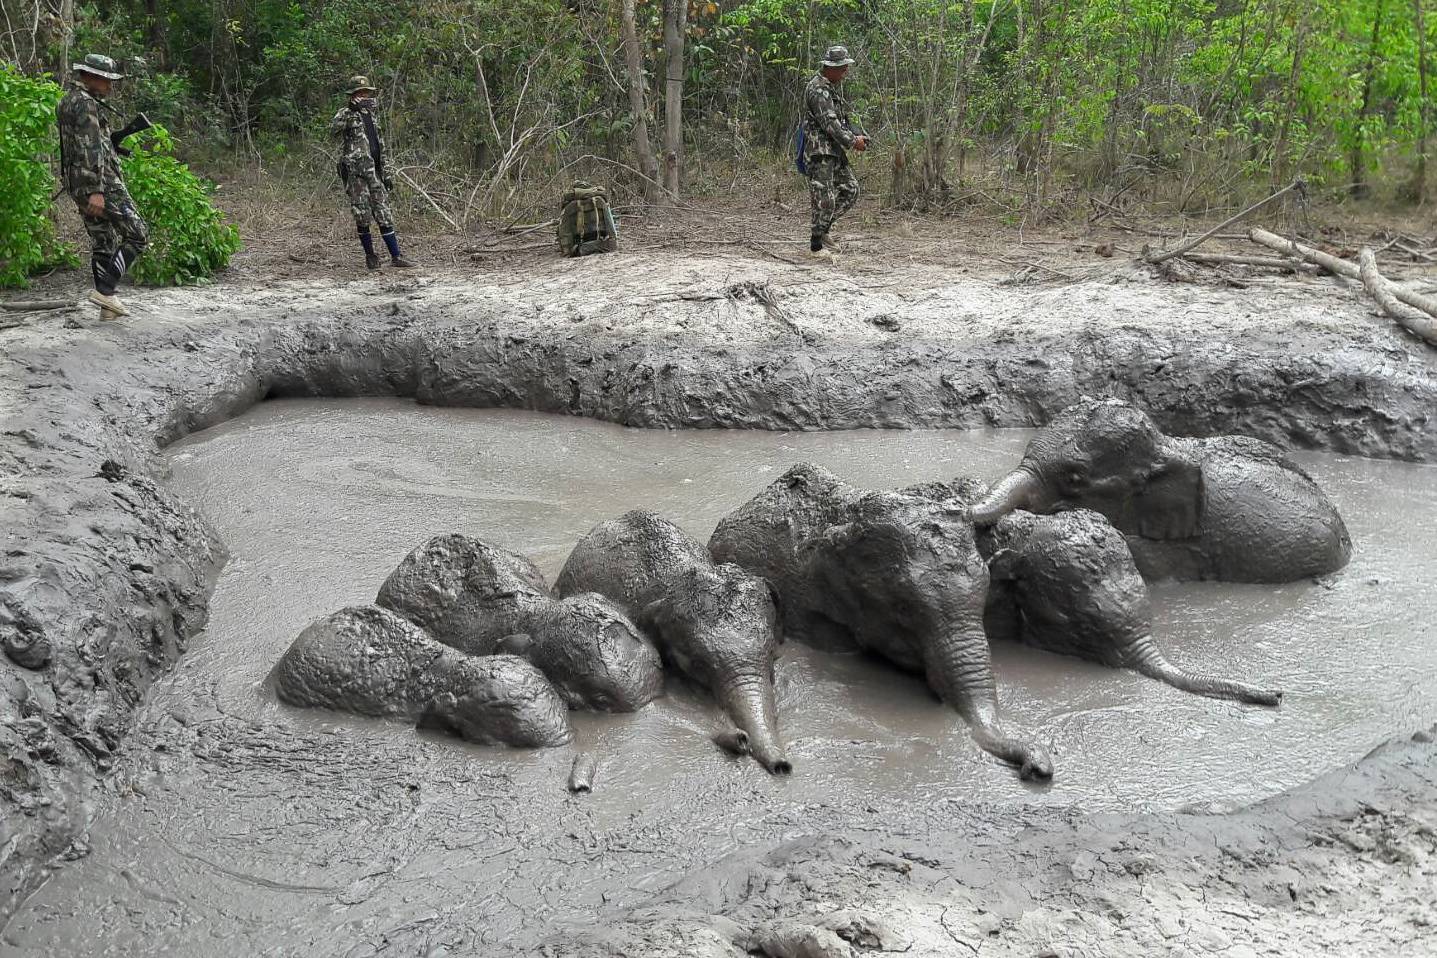 Thai rangers stand next to baby elephants trapped in a mud hole at Thap Lan National Park in Nakhon Ratchasima province